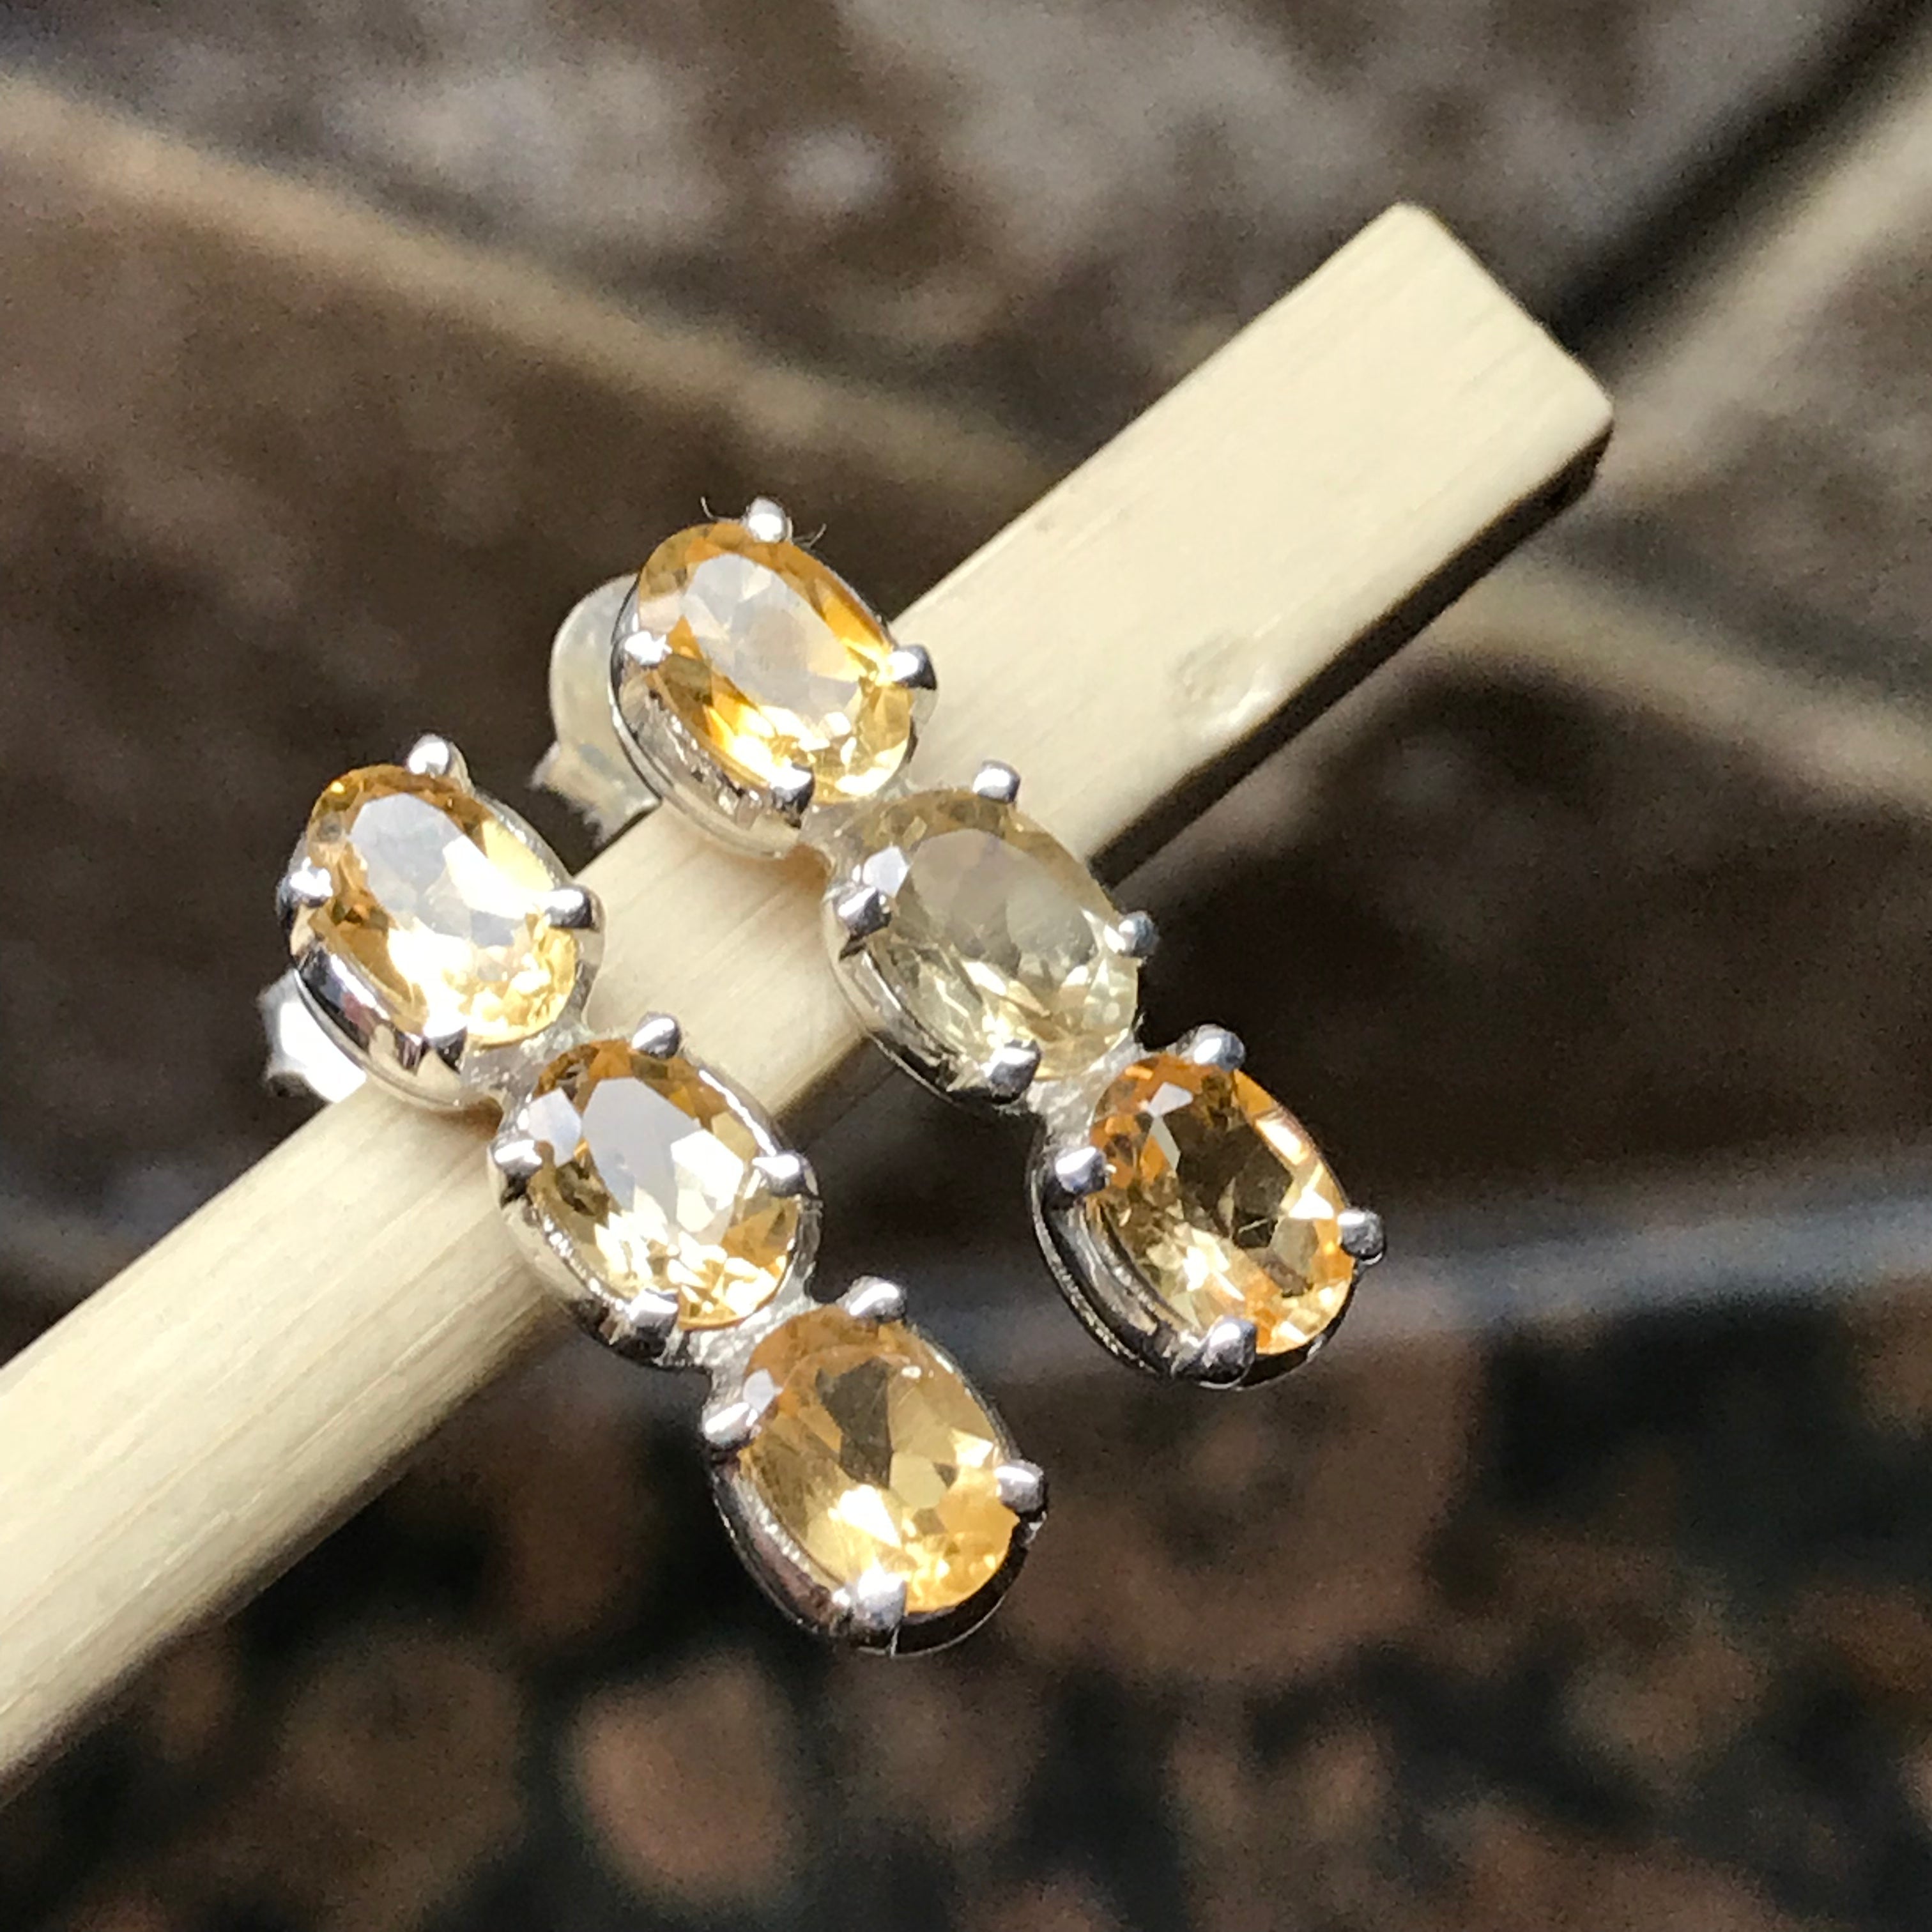 Natural 2.5ct Citrine 925 Solid Sterling Silver Earrings 16mm - Natural Rocks by Kala